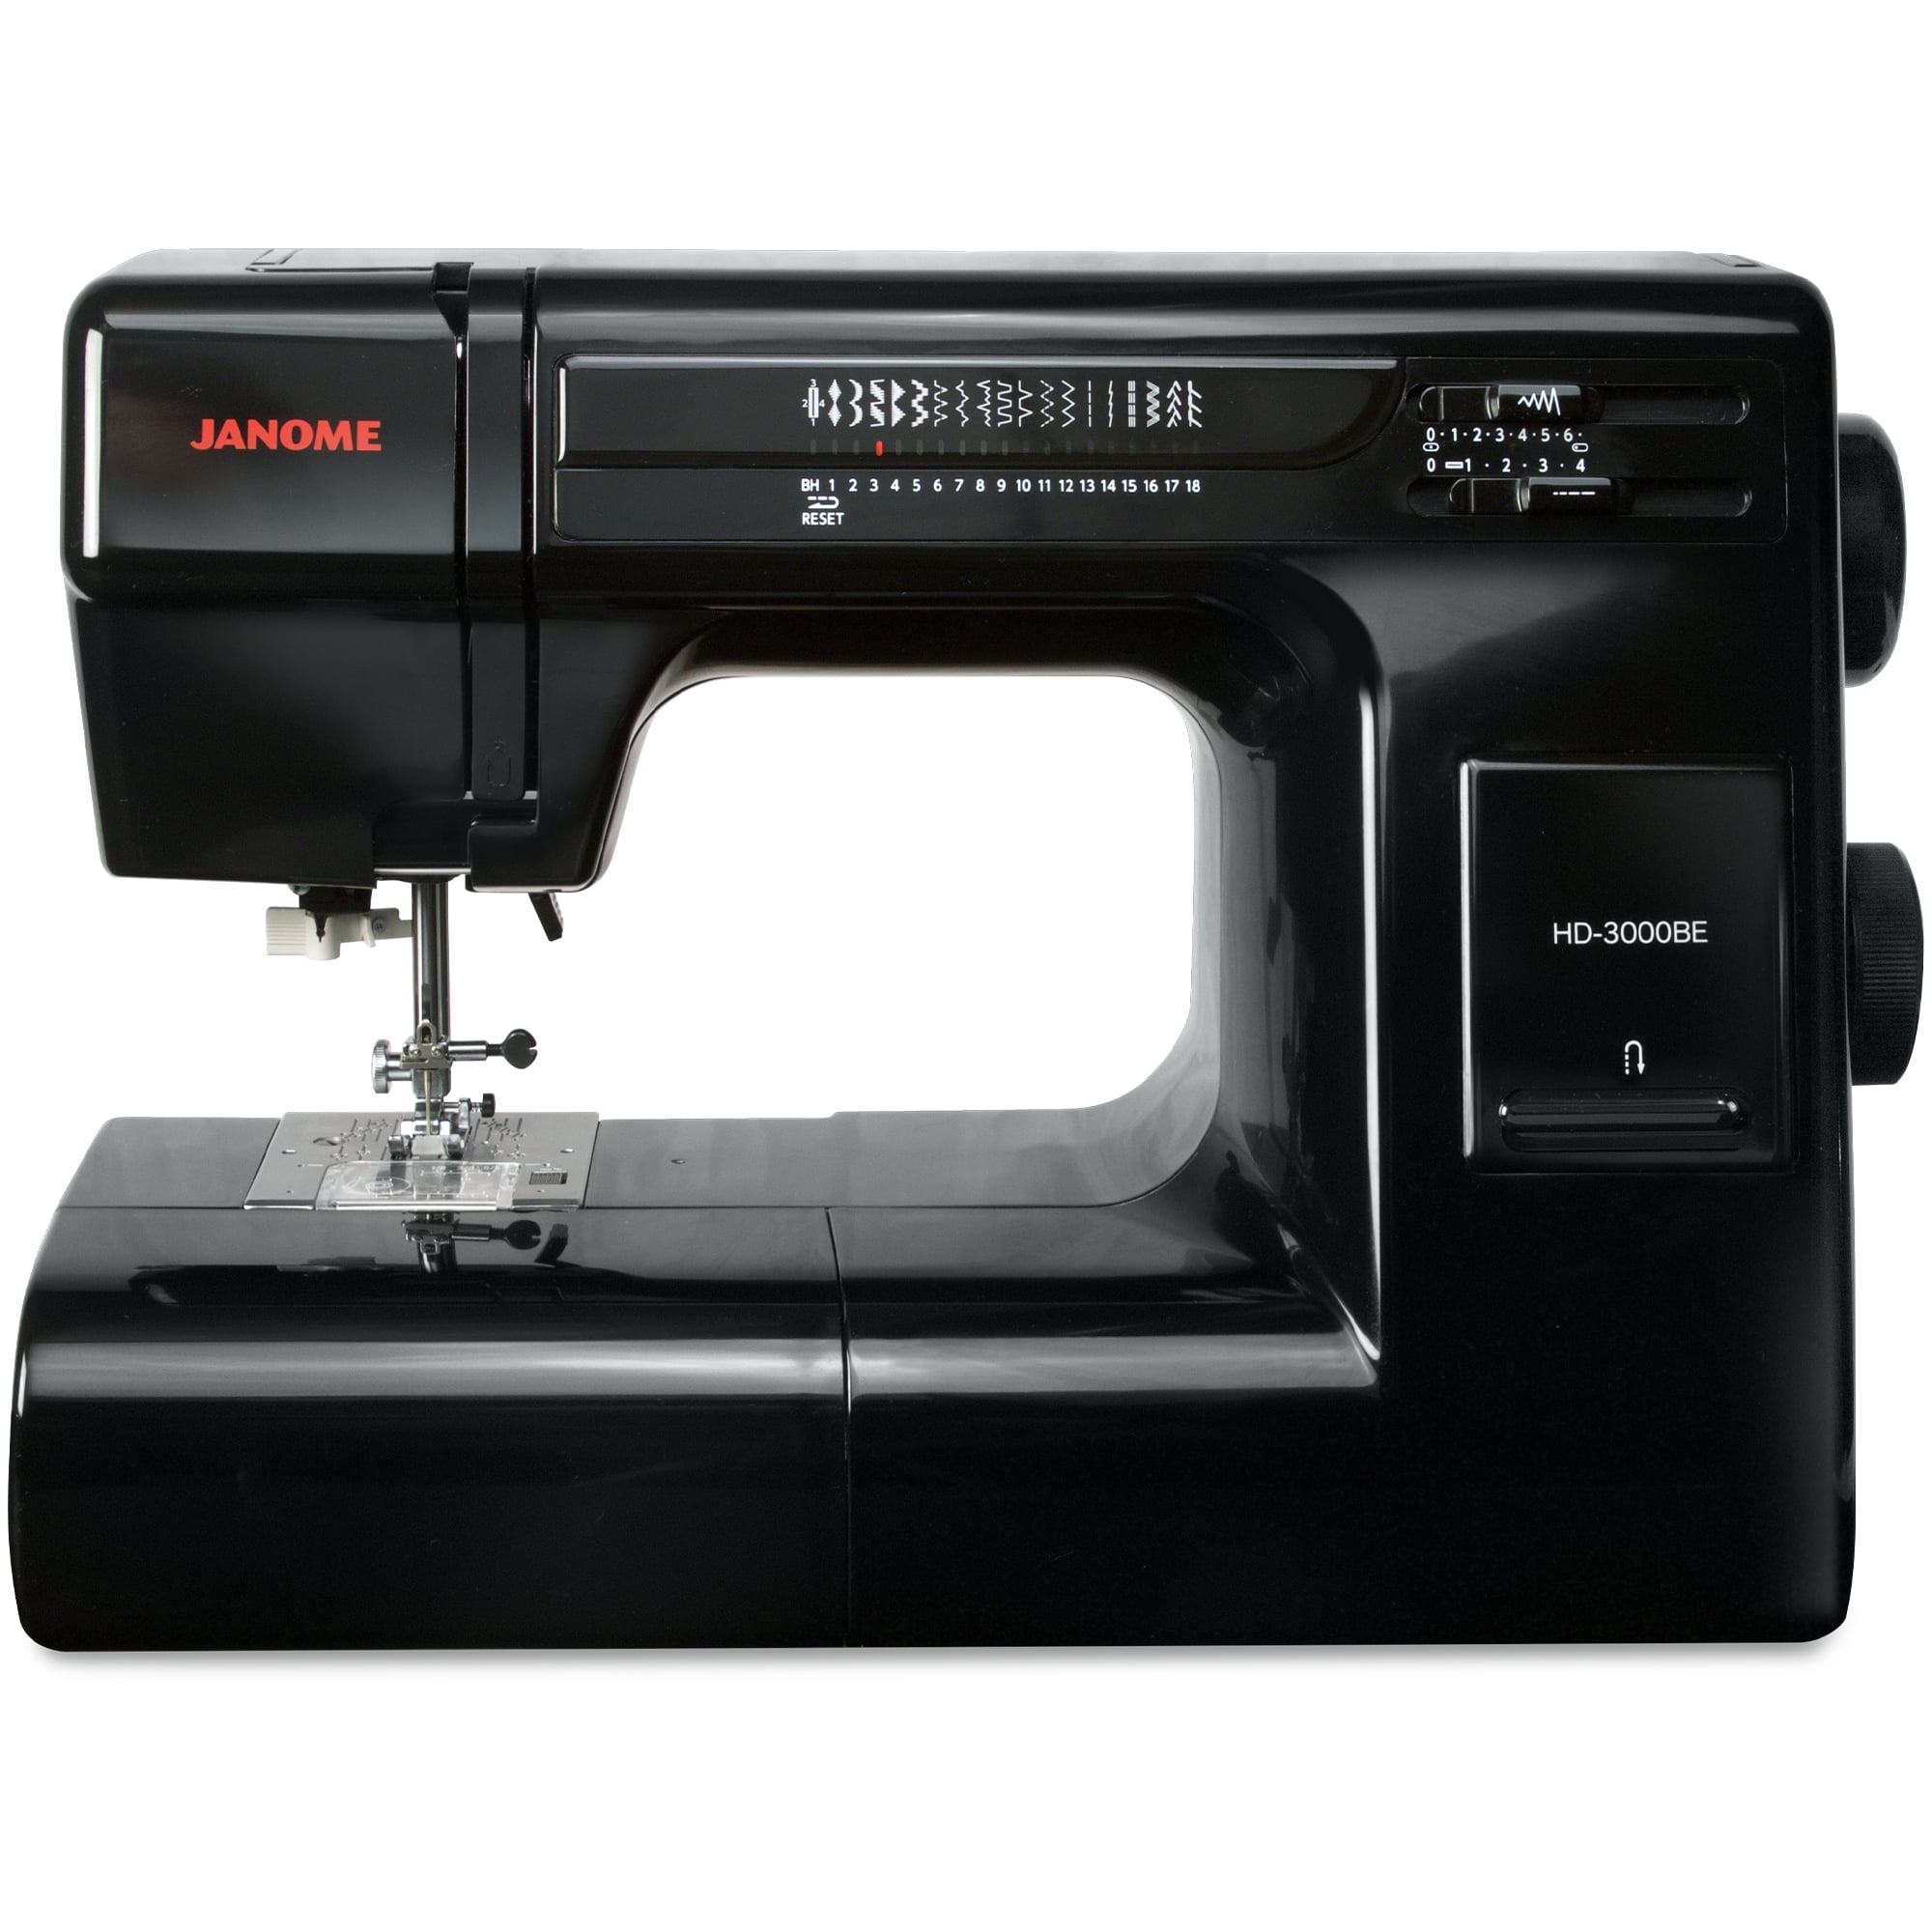 Buy Janome HD3000BE Heavy Duty Sewing Machine w/ 18 stitches Online in  Pakistan. 274145131